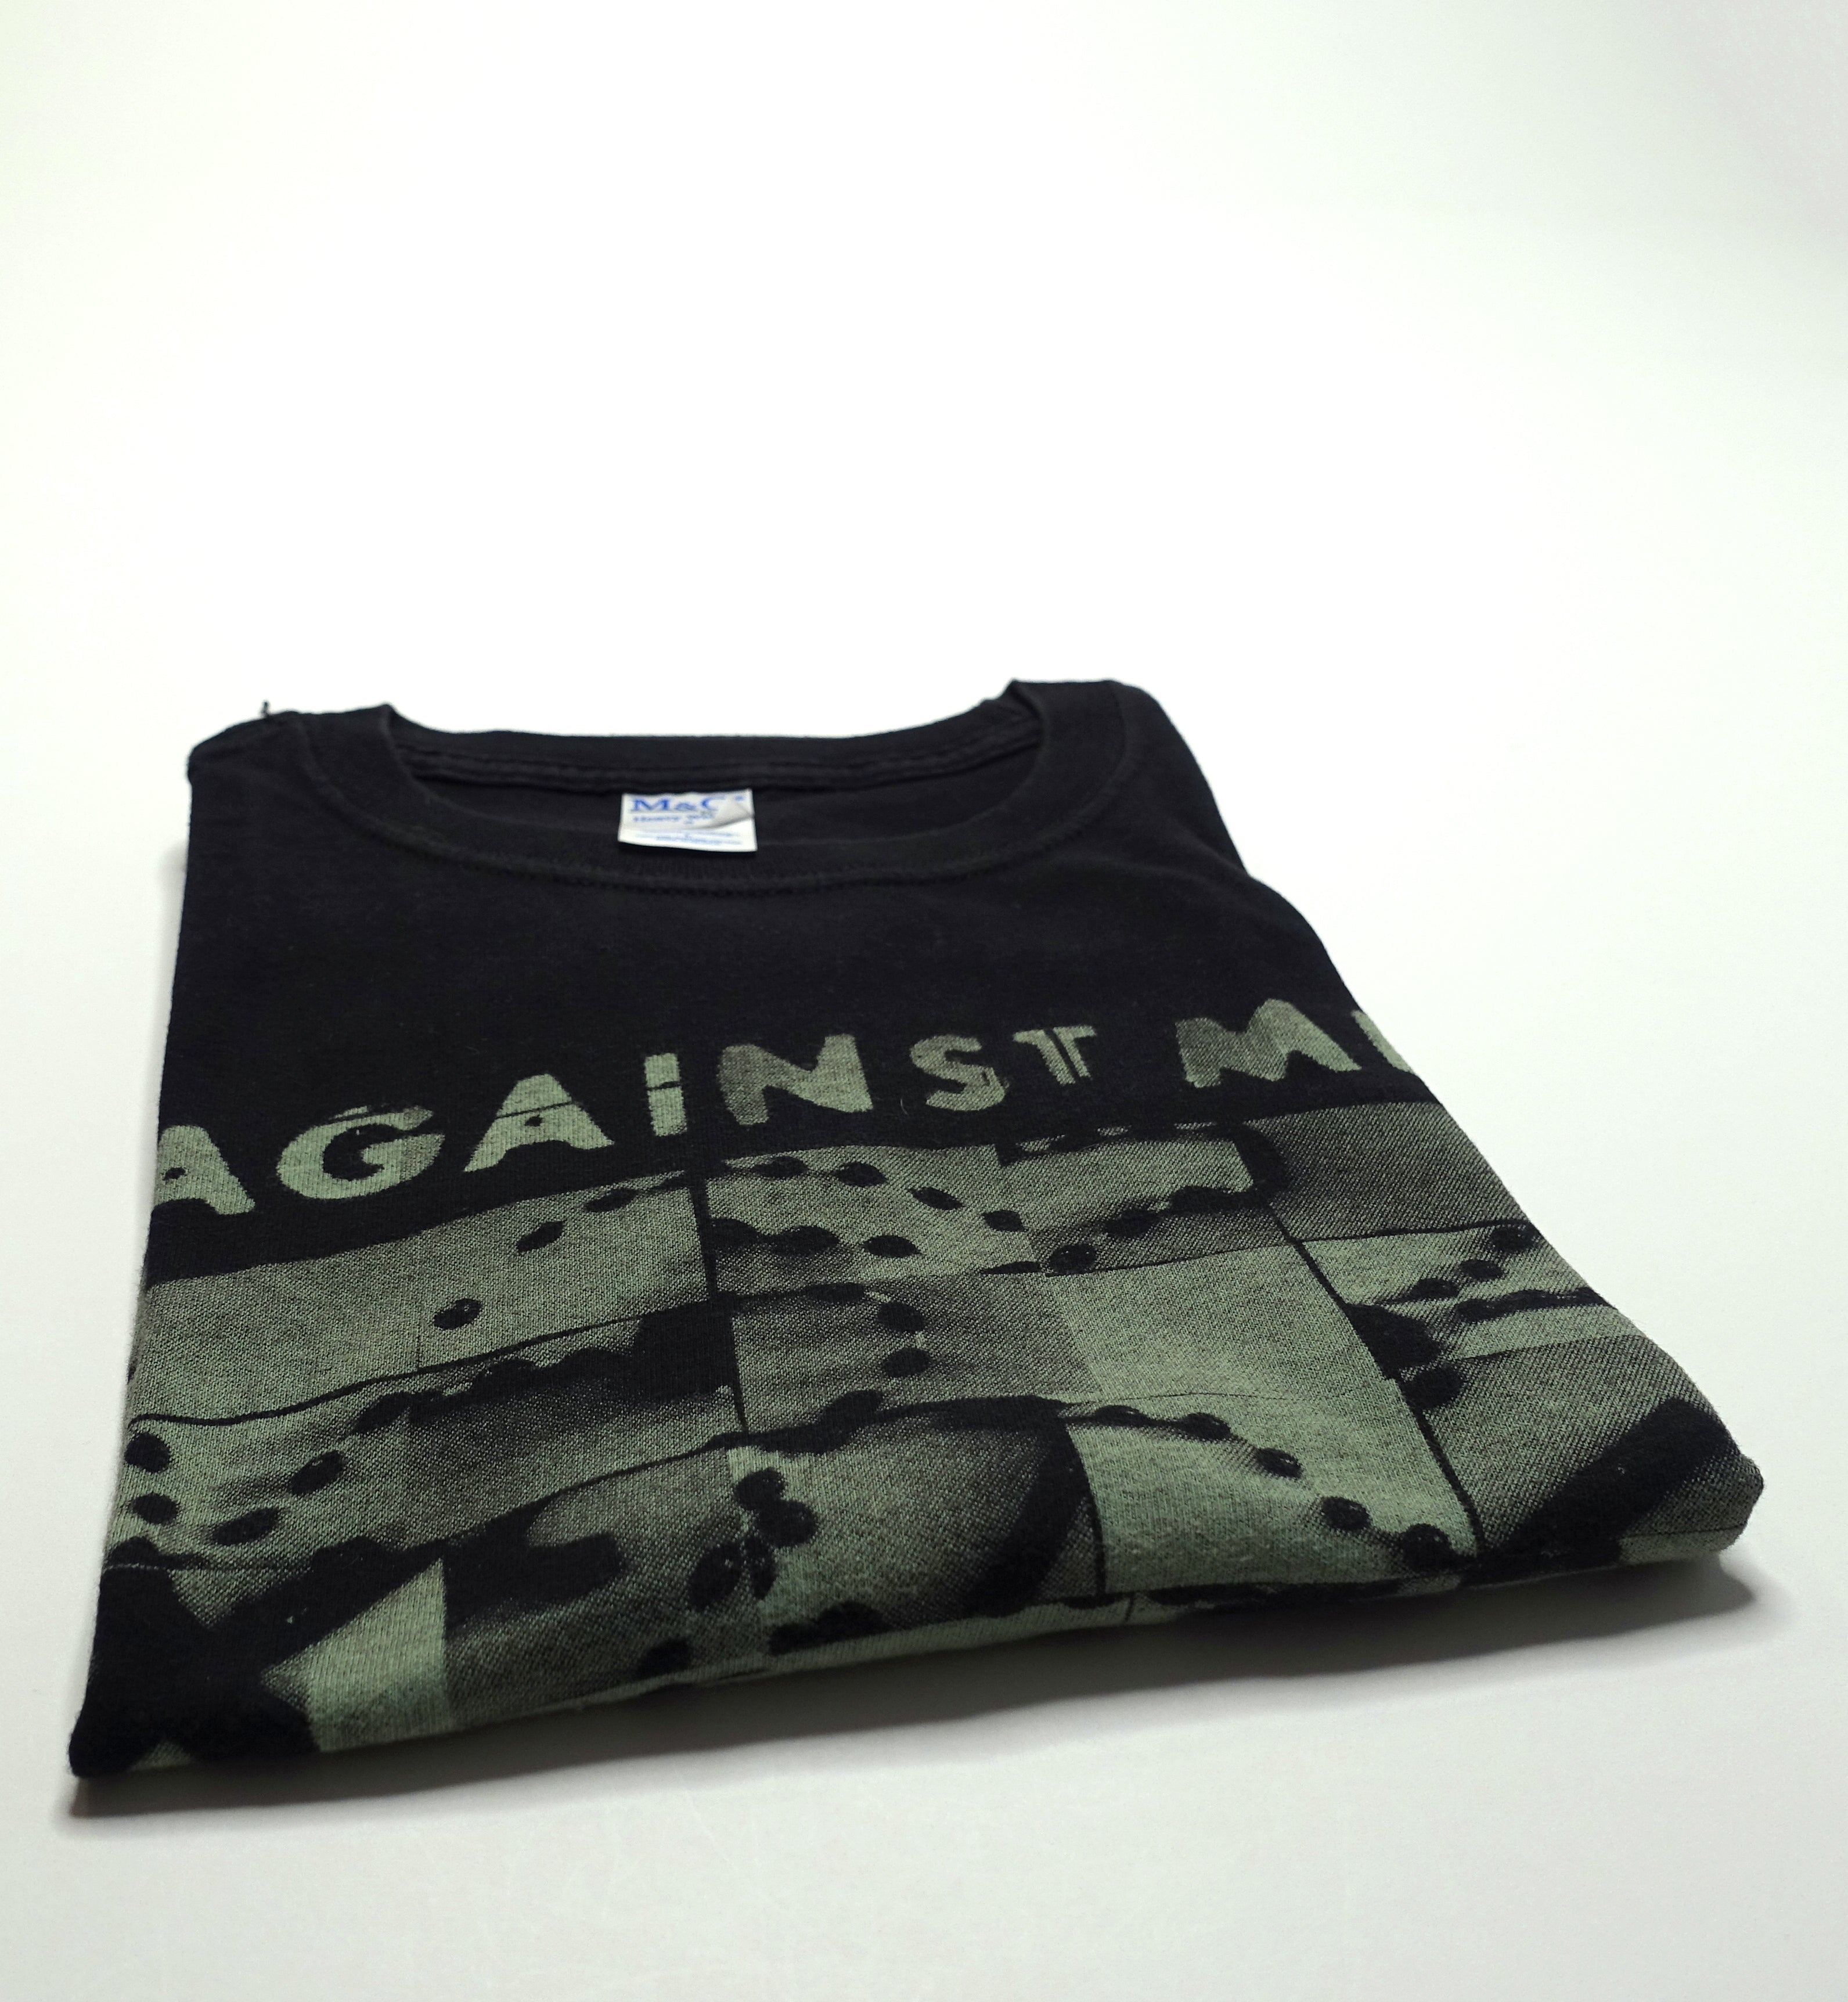 Against Me! - Rosary Beads 00's Tour Shirt Size Large